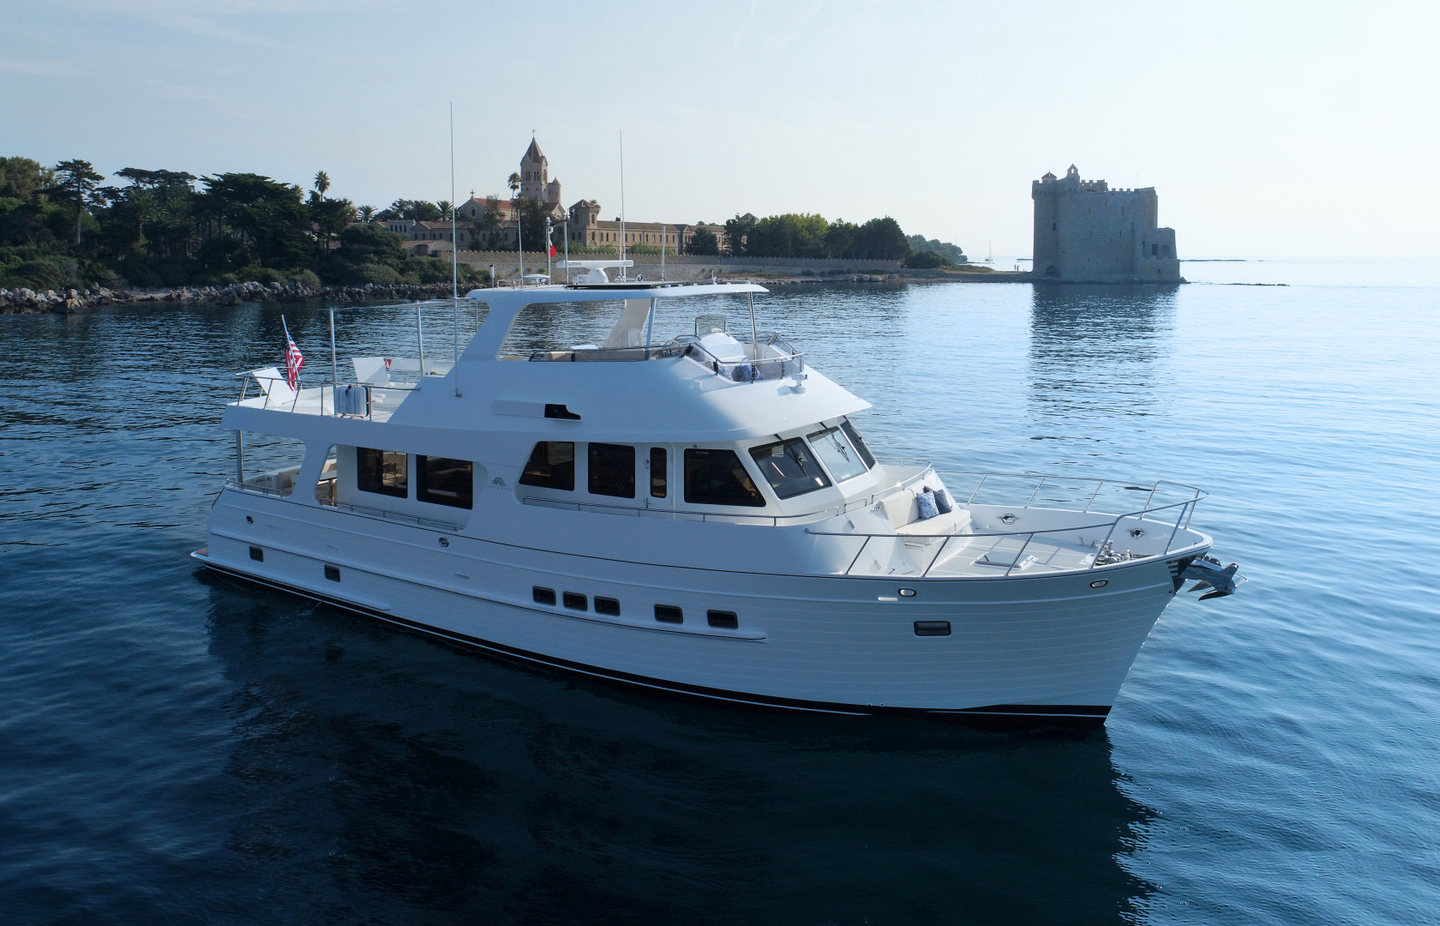 360 VR Virtual Tours of the Outer Reef 640 Motoryacht